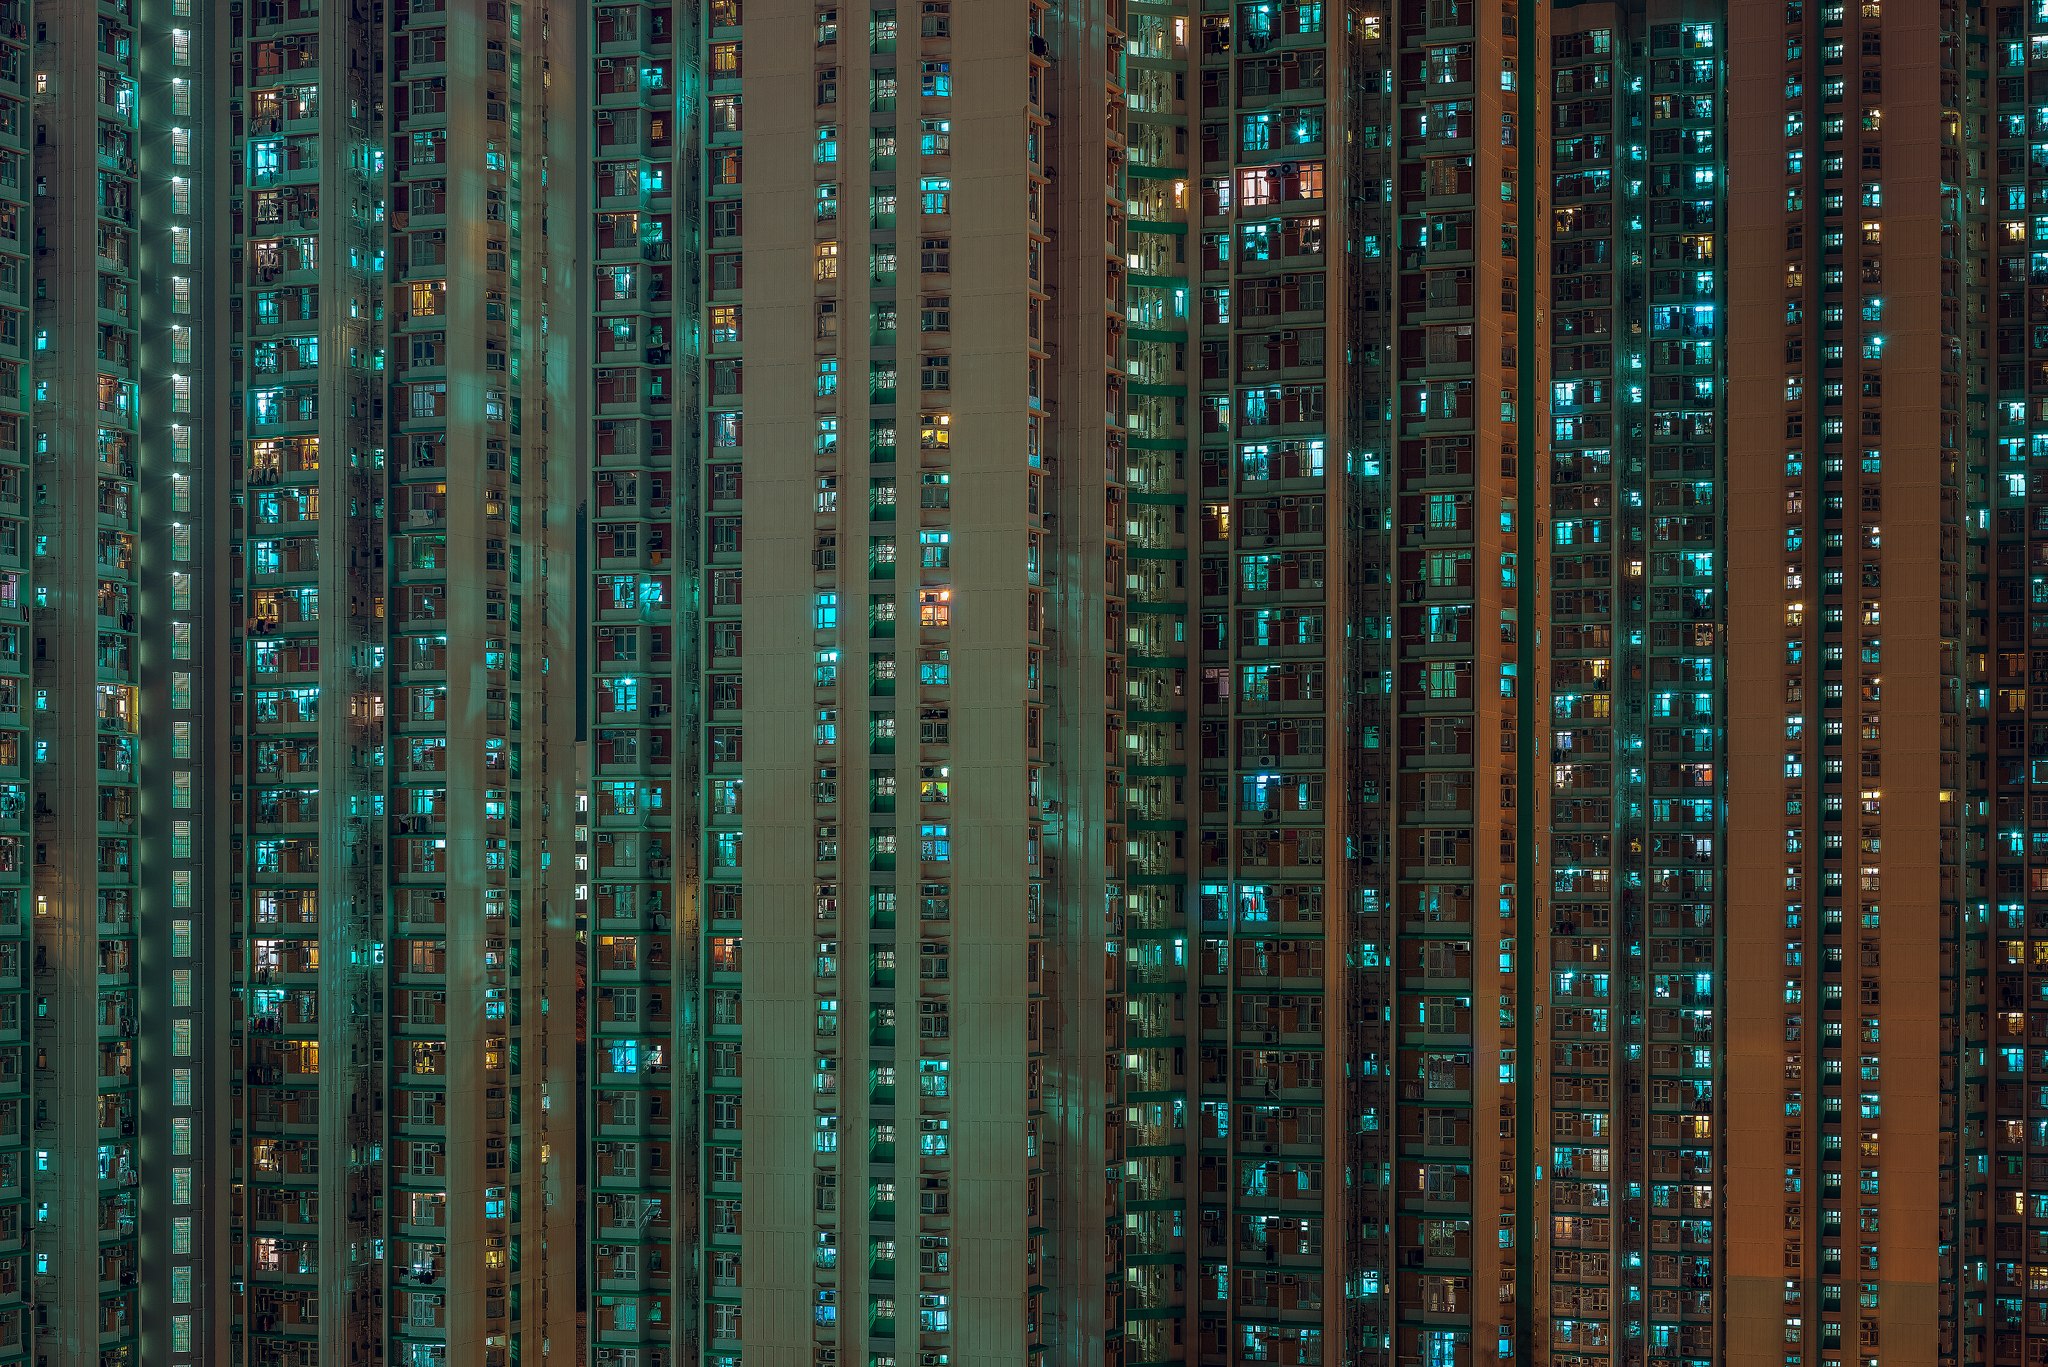 Infinite Lines & Architecture of Hong Kong